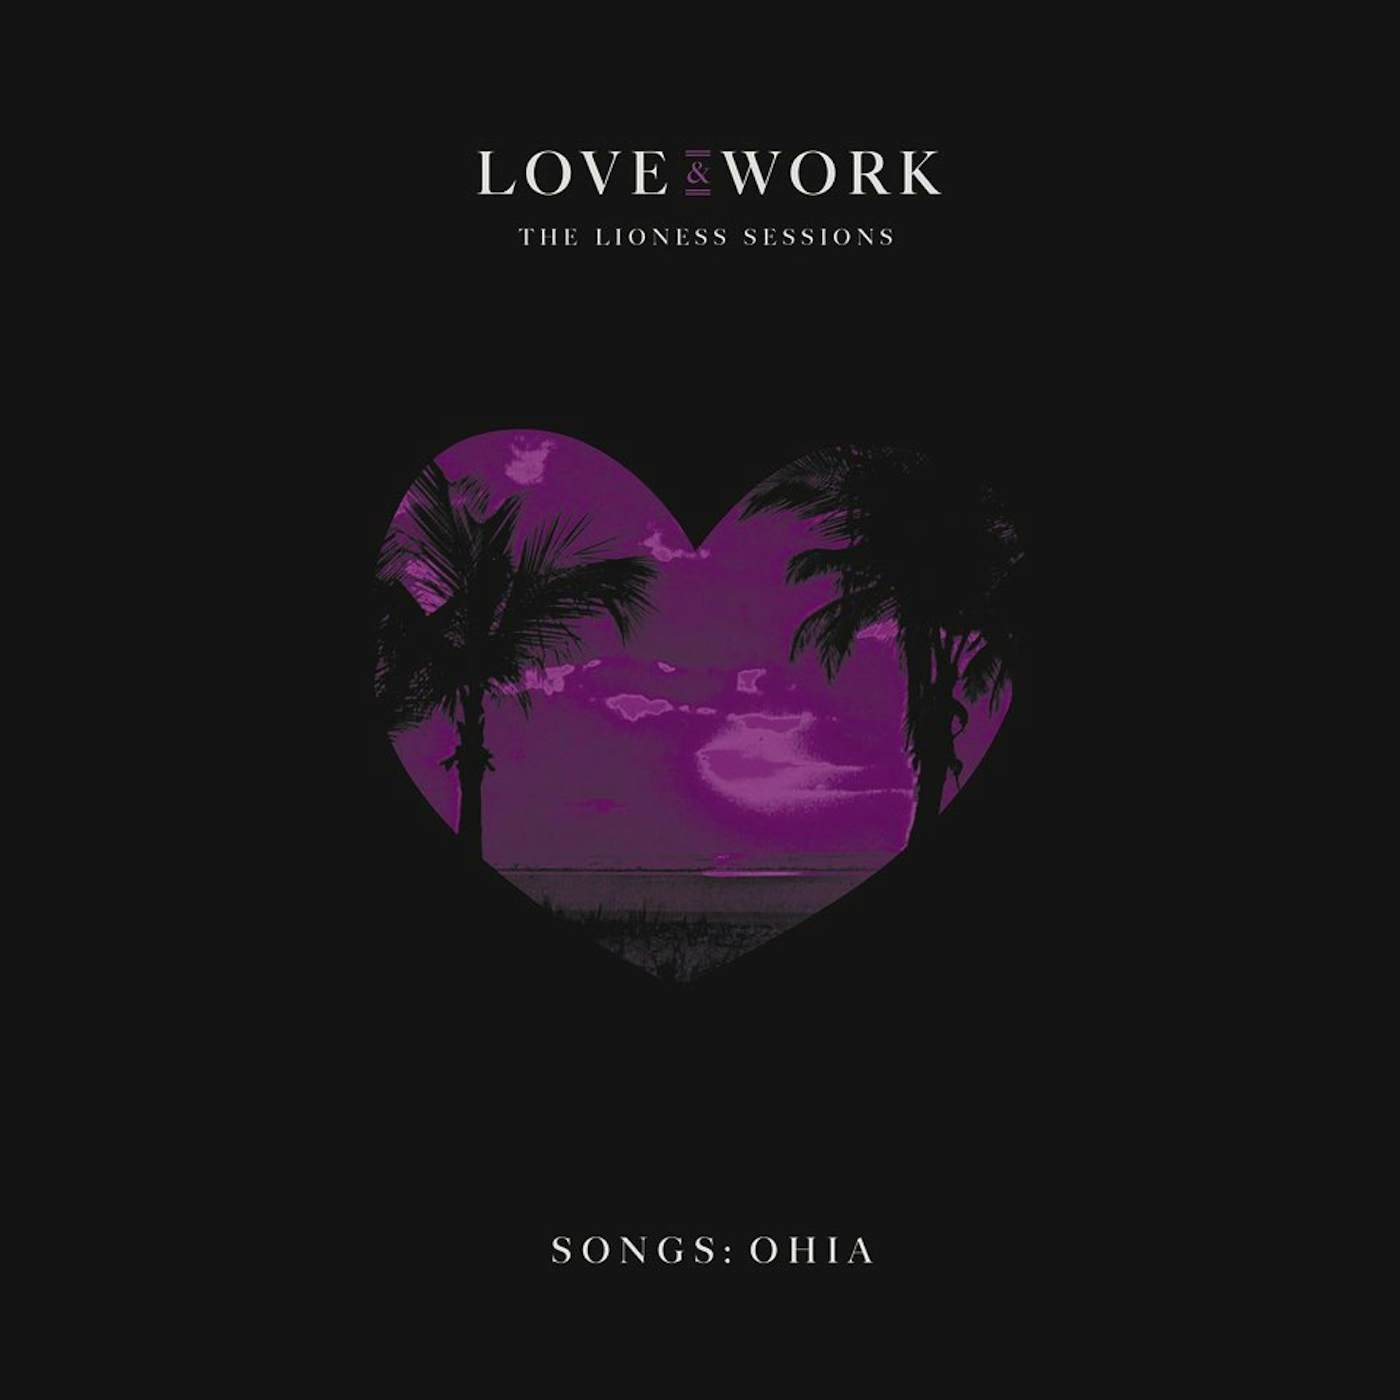 Songs: Ohia LOVE & WORK: THE LIONESS SESSIONS Vinyl Record